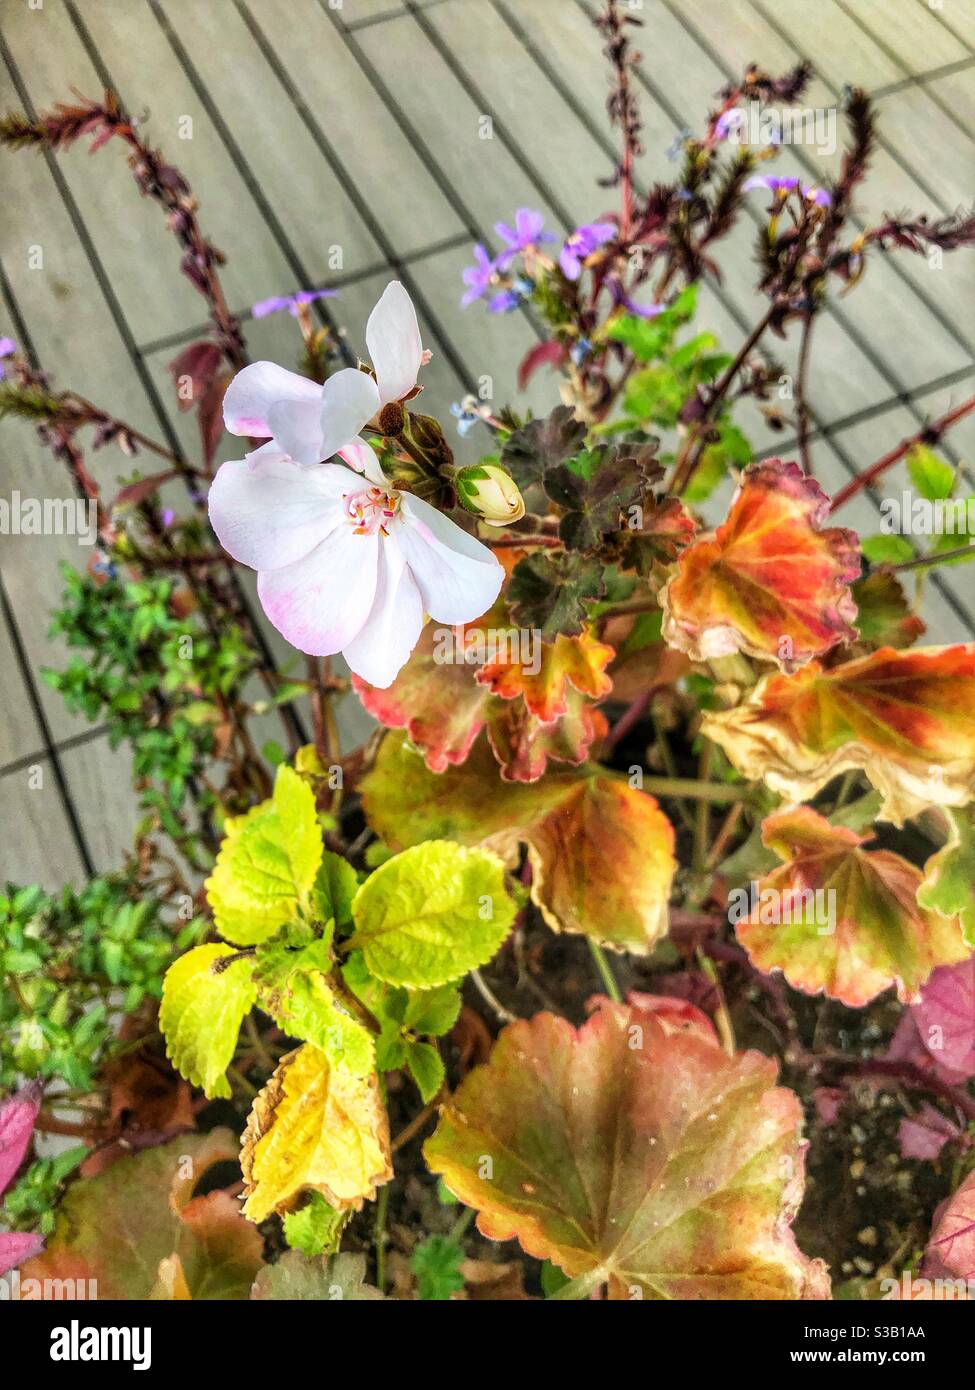 Autumn potted plant. Stock Photo